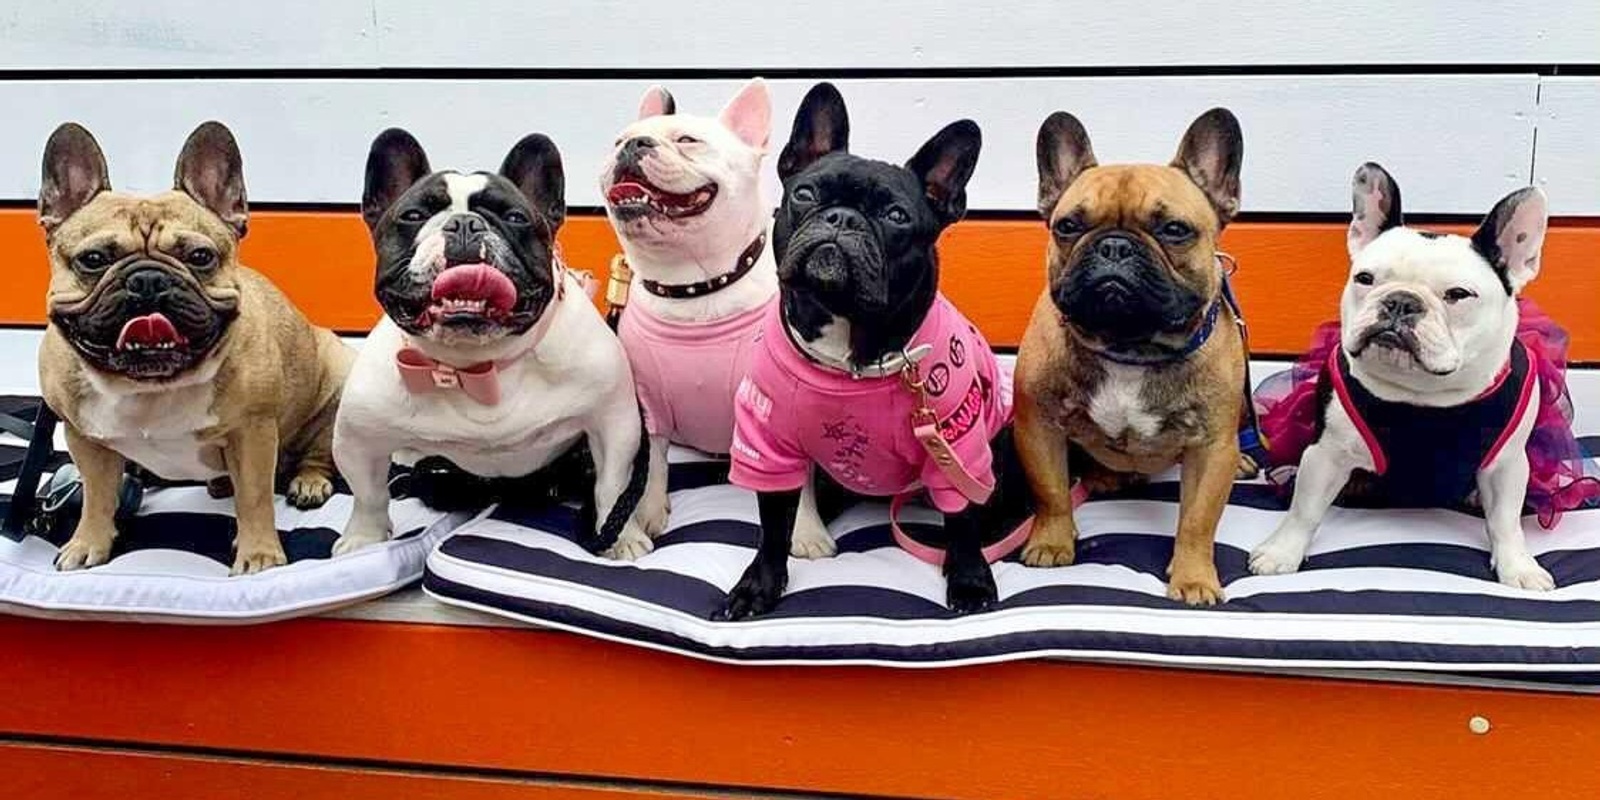 Banner image for Frenchies Puppy Pub Crawl